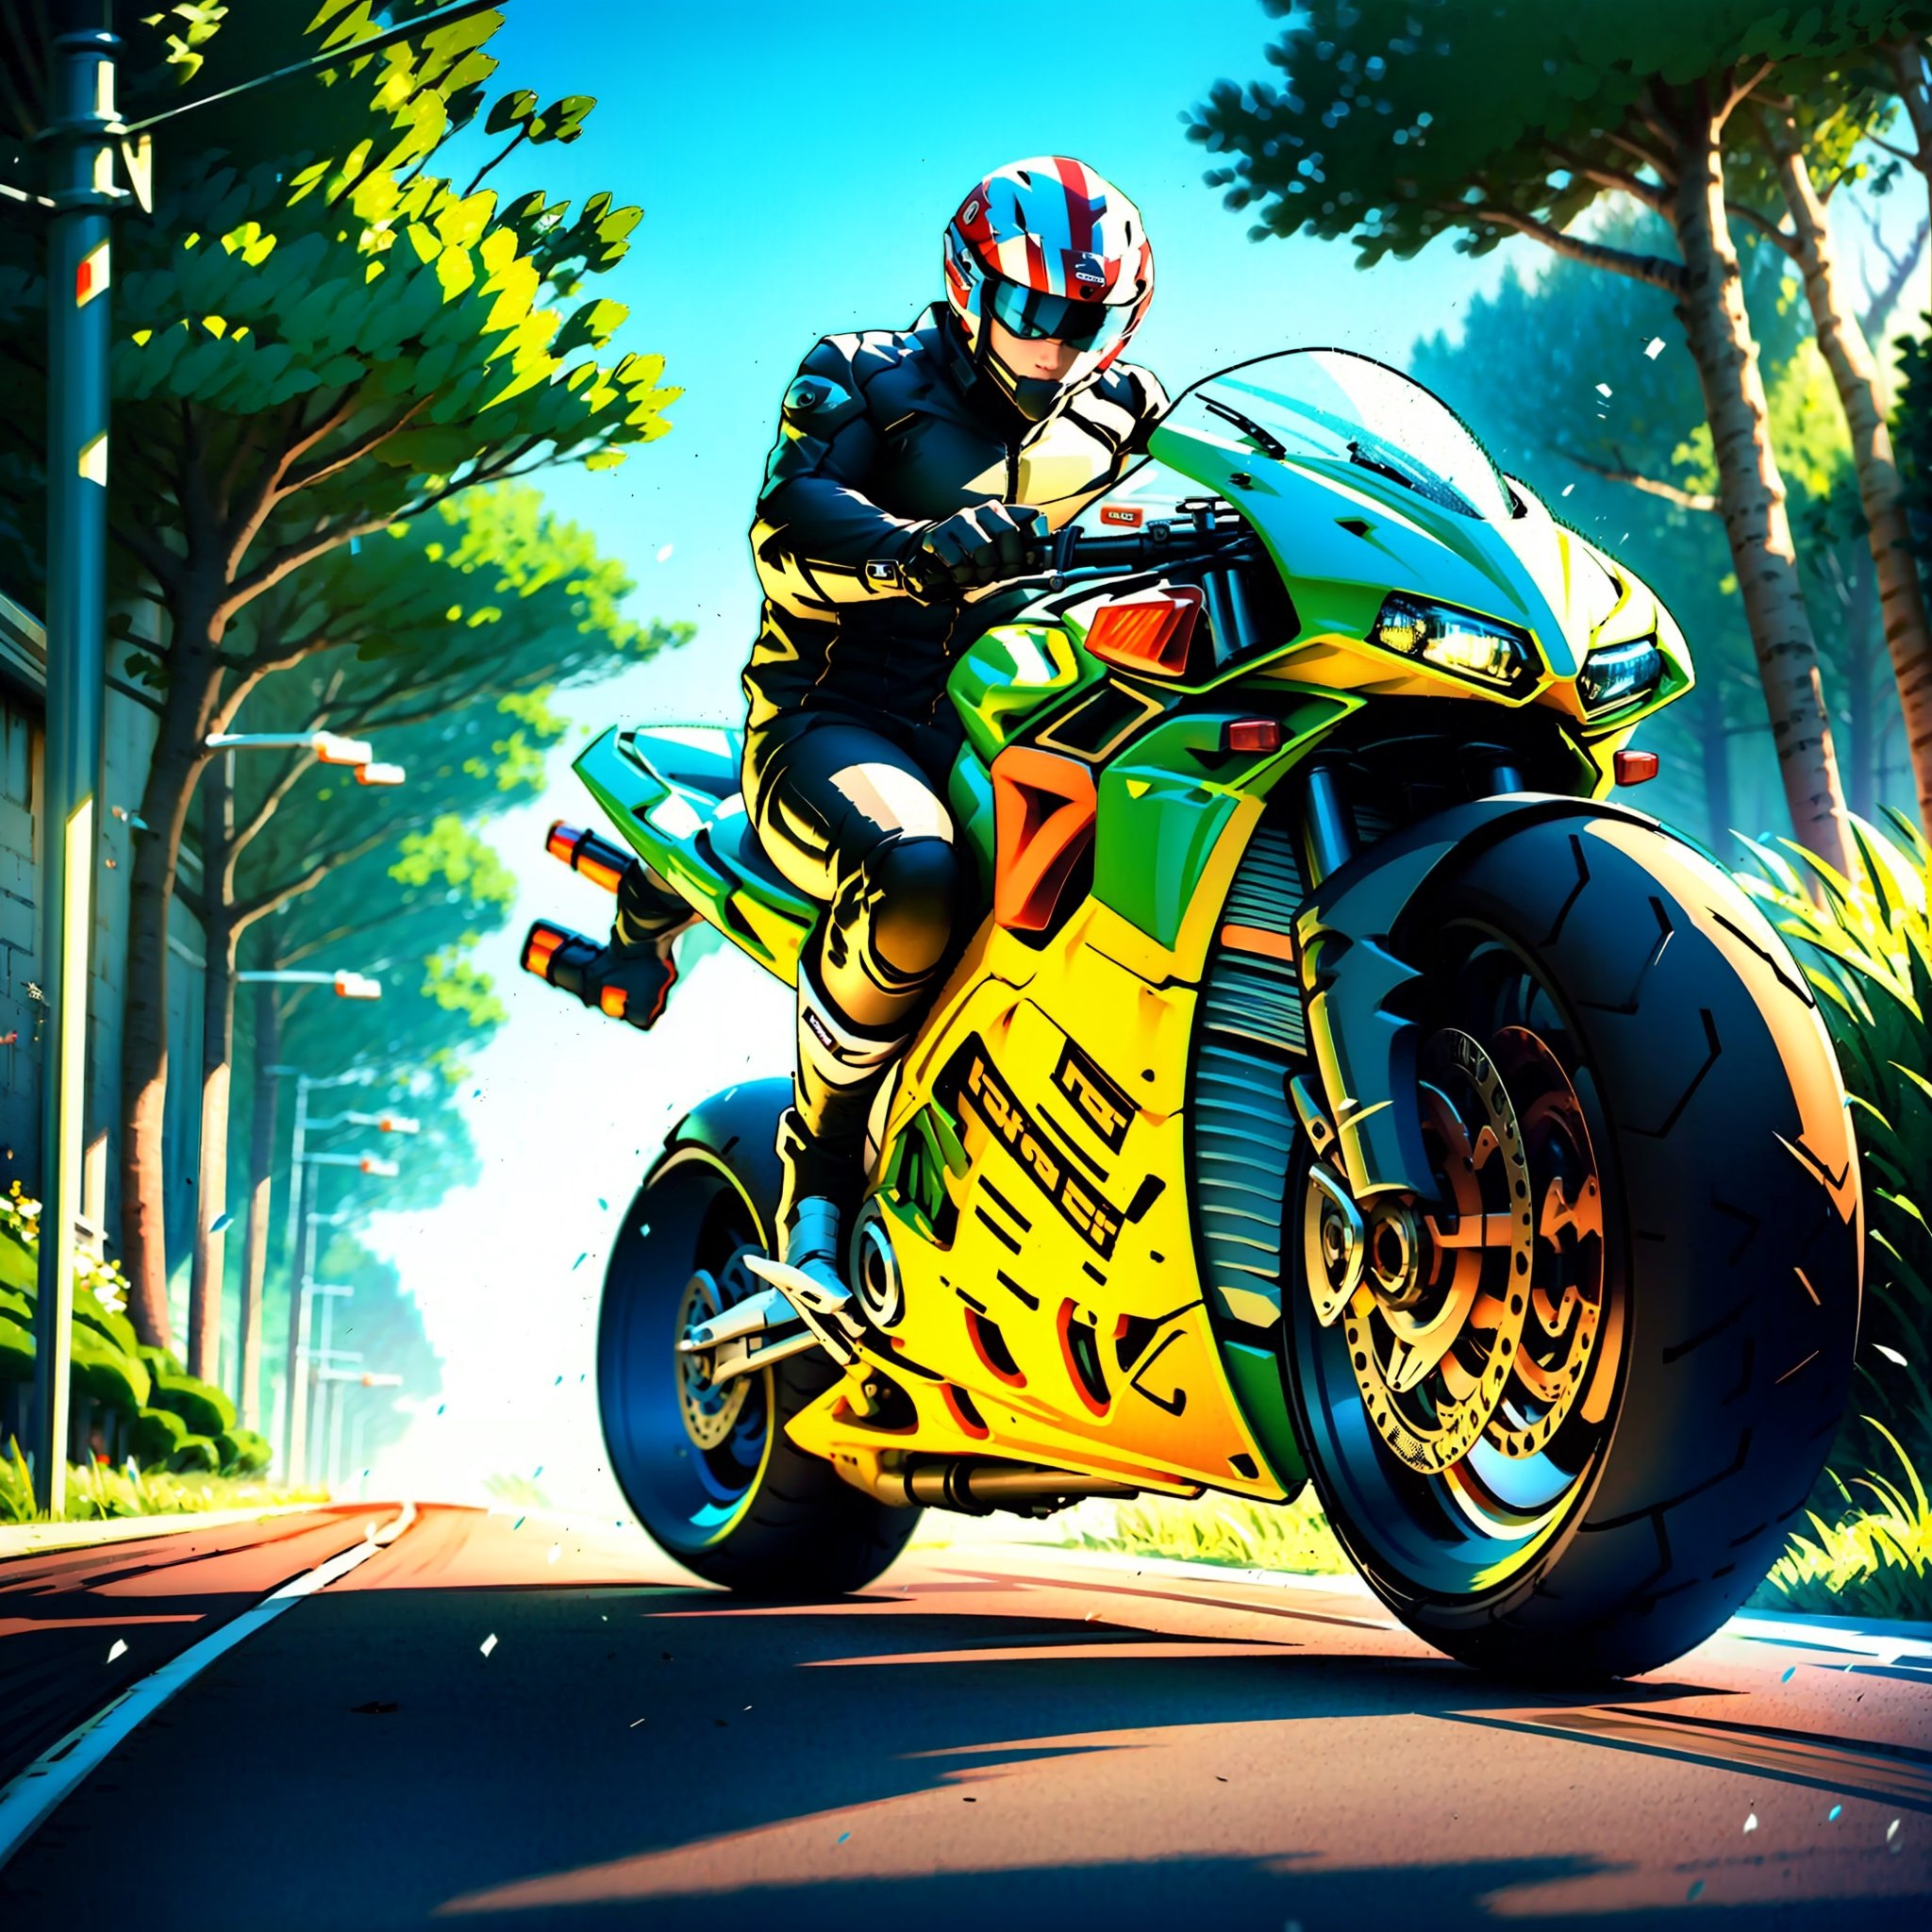 there is a man riding a motorcycle on a road with trees in the background, ducati , high quality picture, portrait shot, wide angle dynamic action shot, speeding on motorcycle, futuristic motorcycle, cover shot, riding a motorbike down a street, high speed action, motorbike, dynamic angled shot